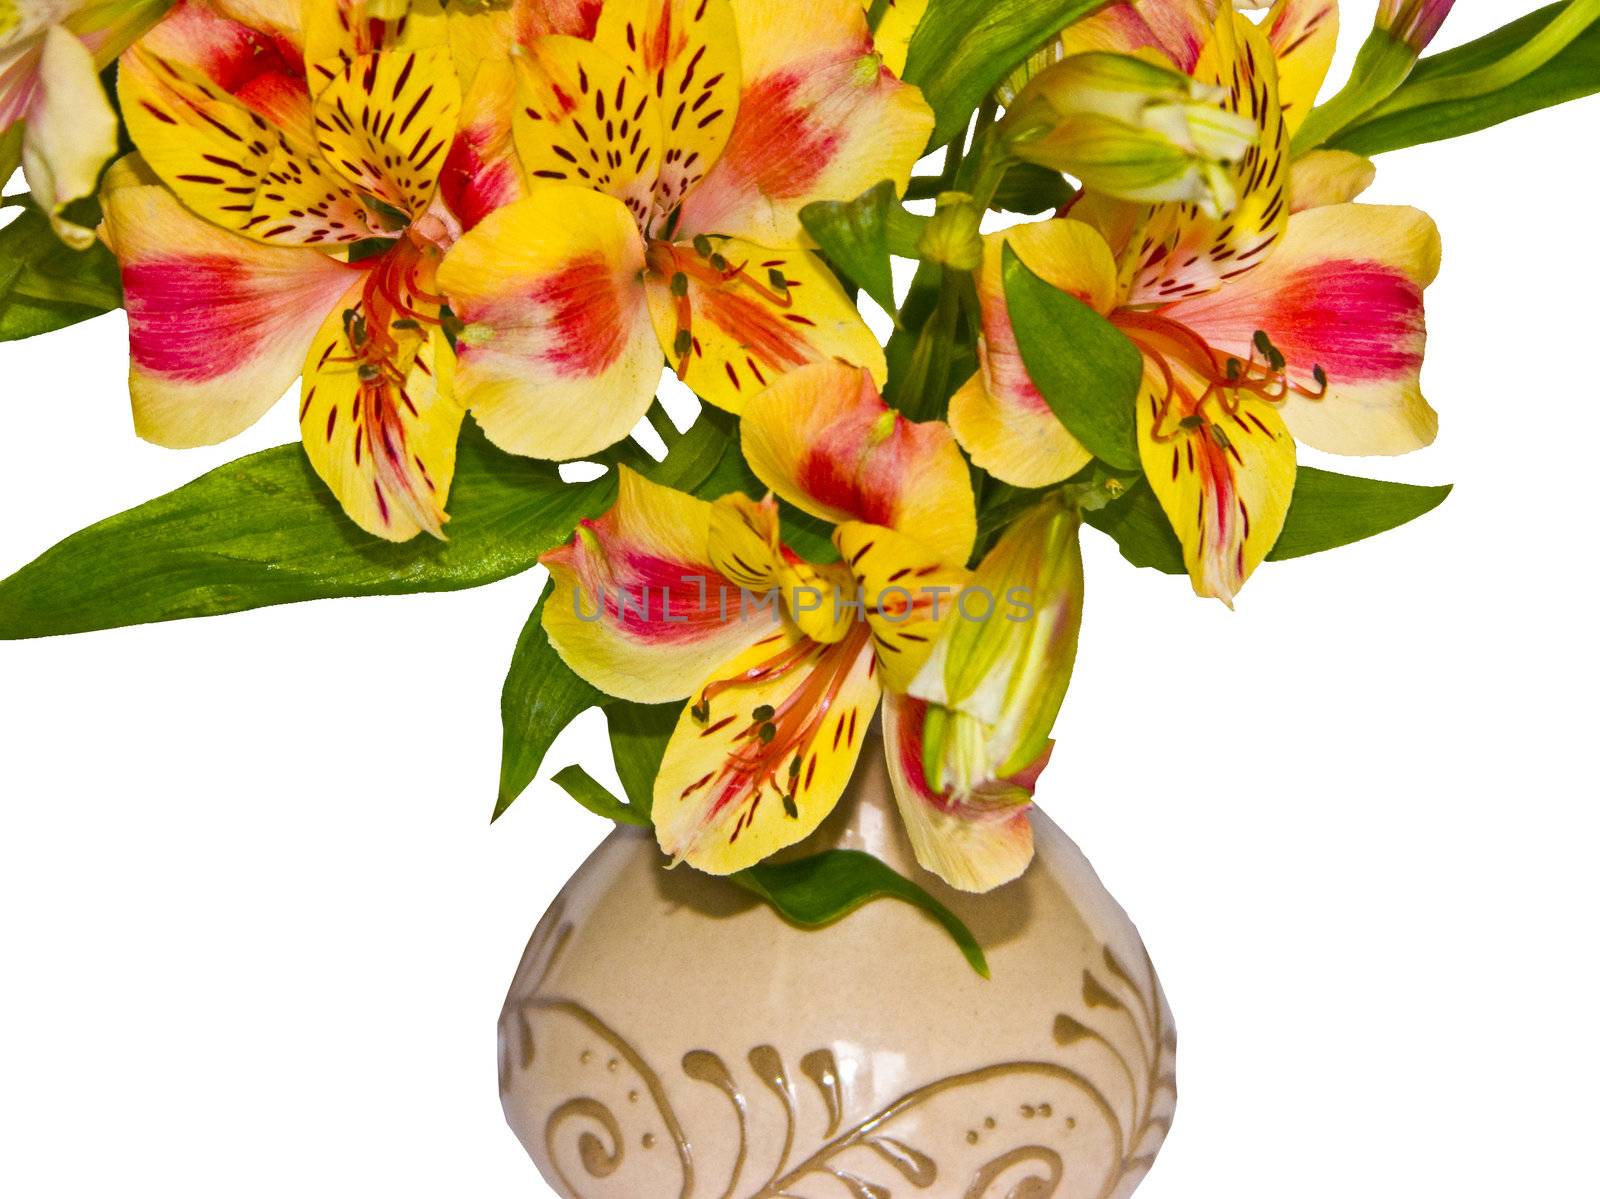 bouquet of alstroemeria in a clay vase1 by soloir